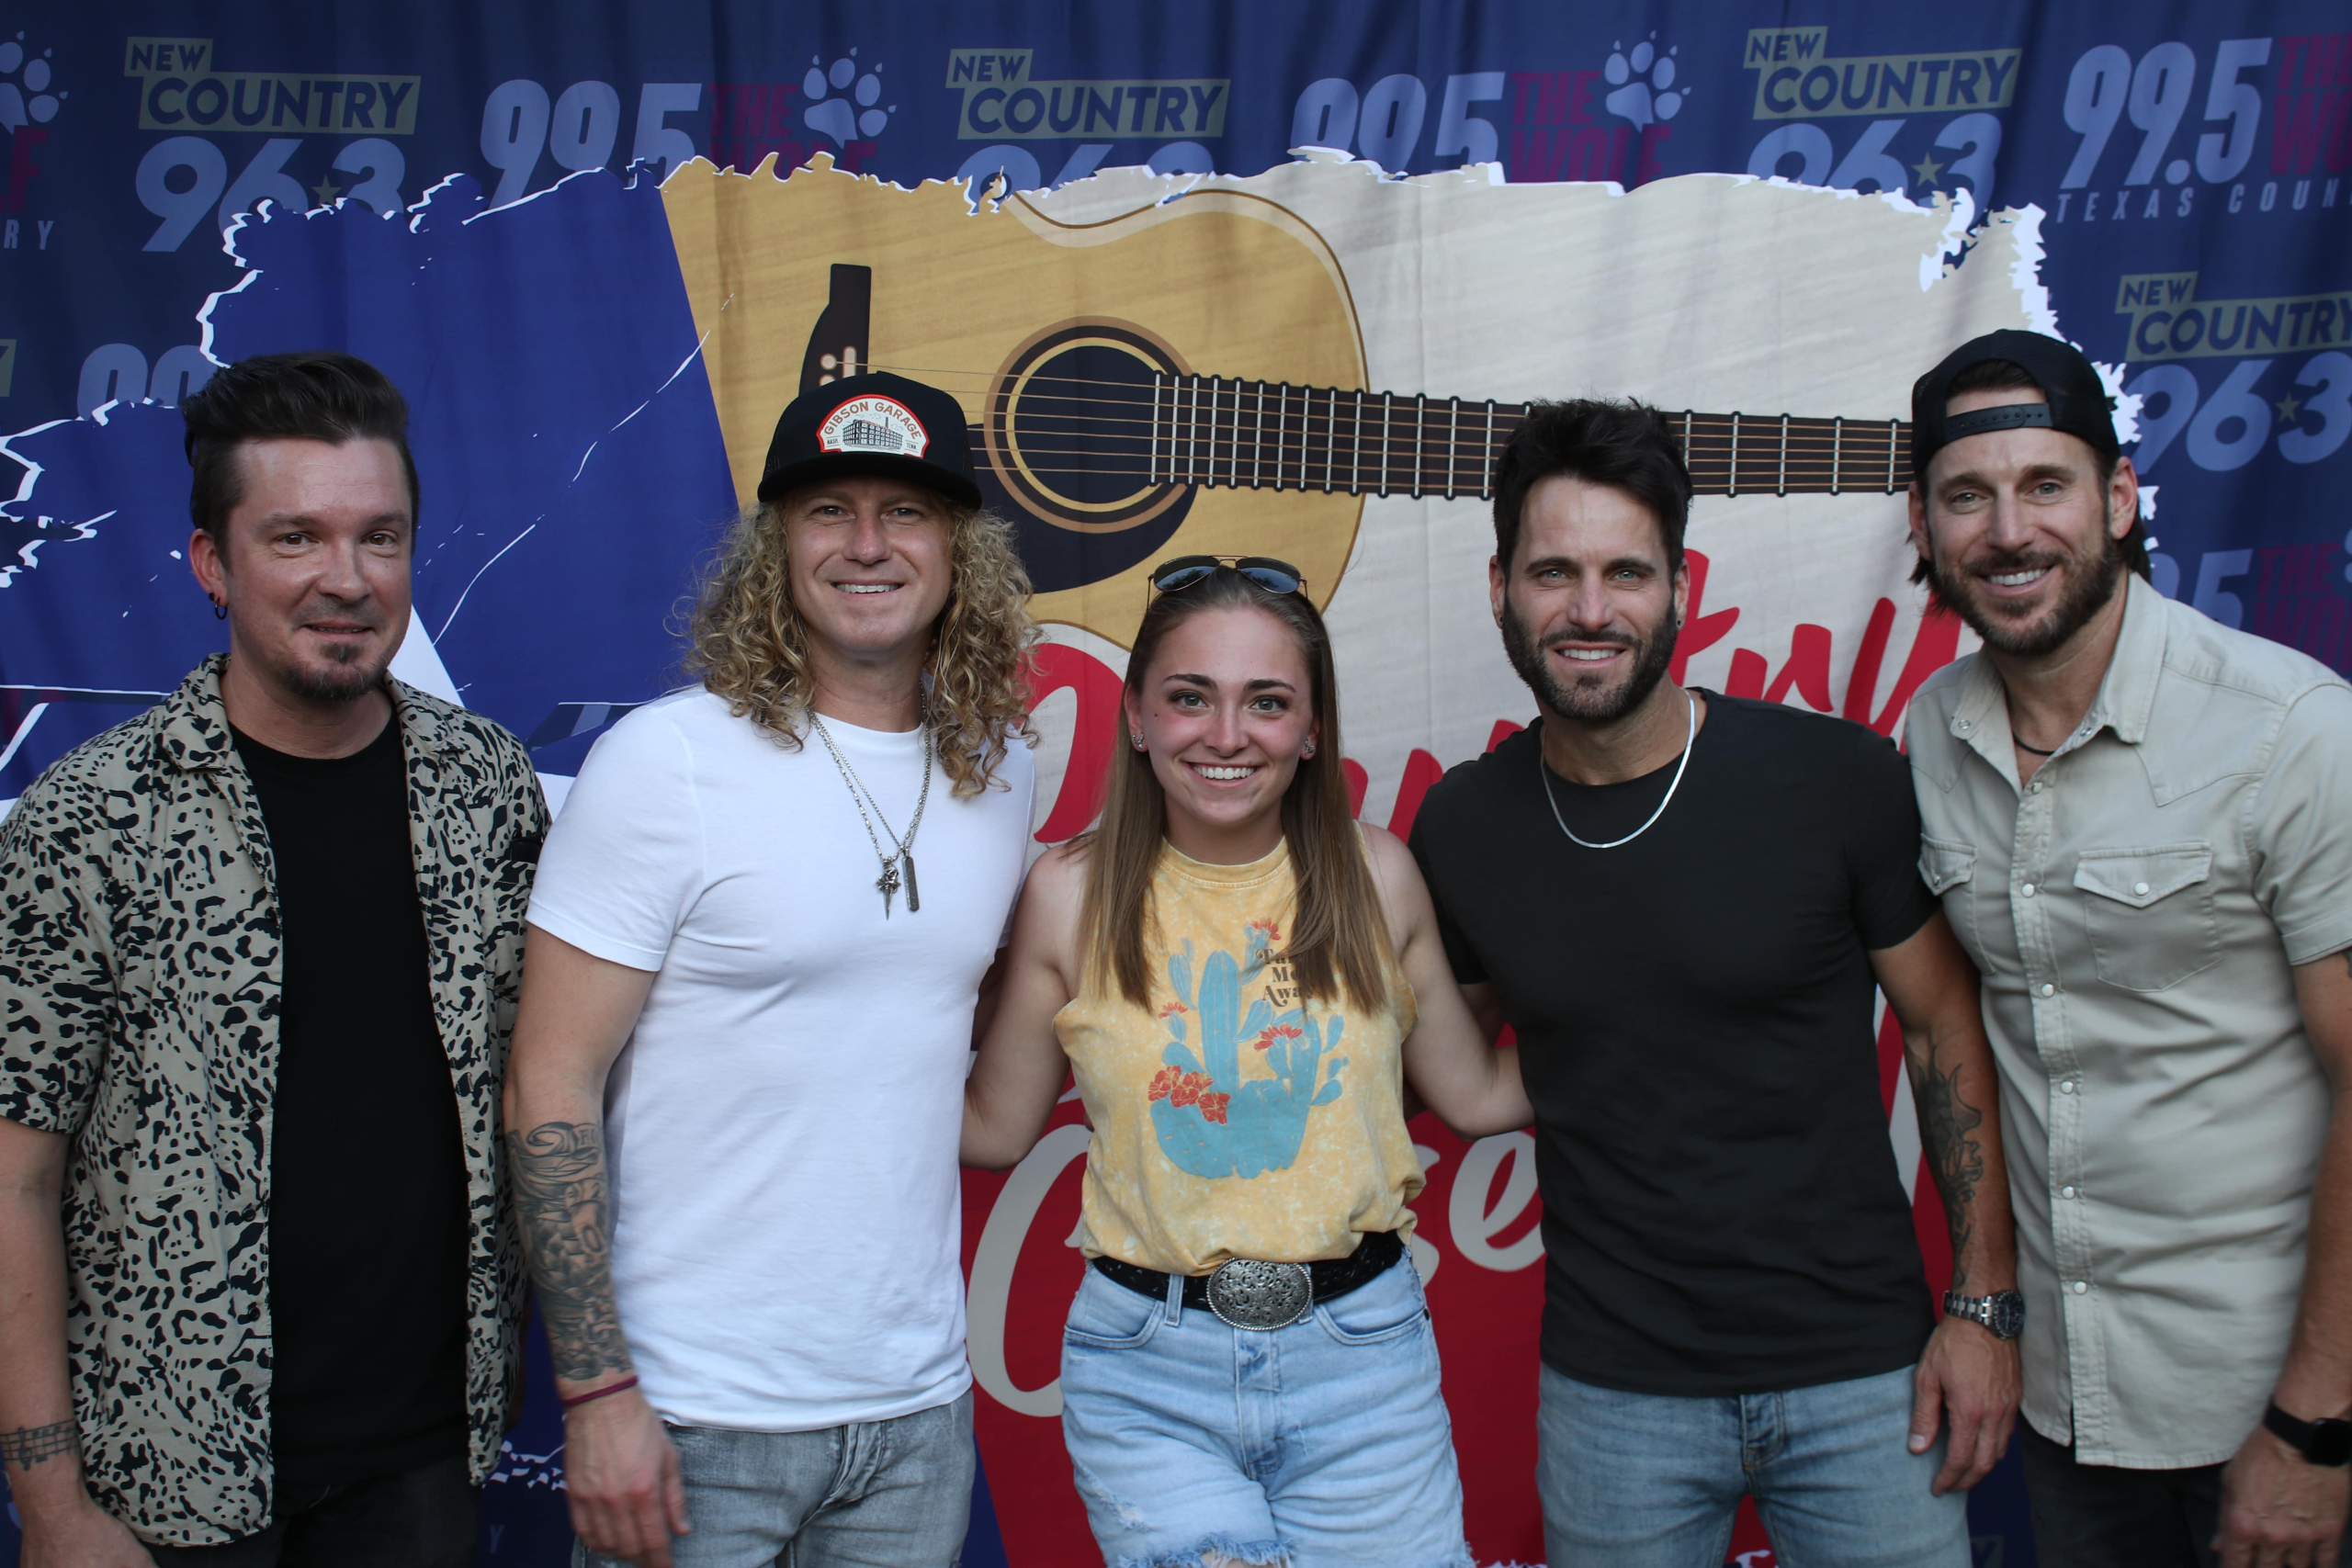 Photos from Parmalee Country Close Up 2022